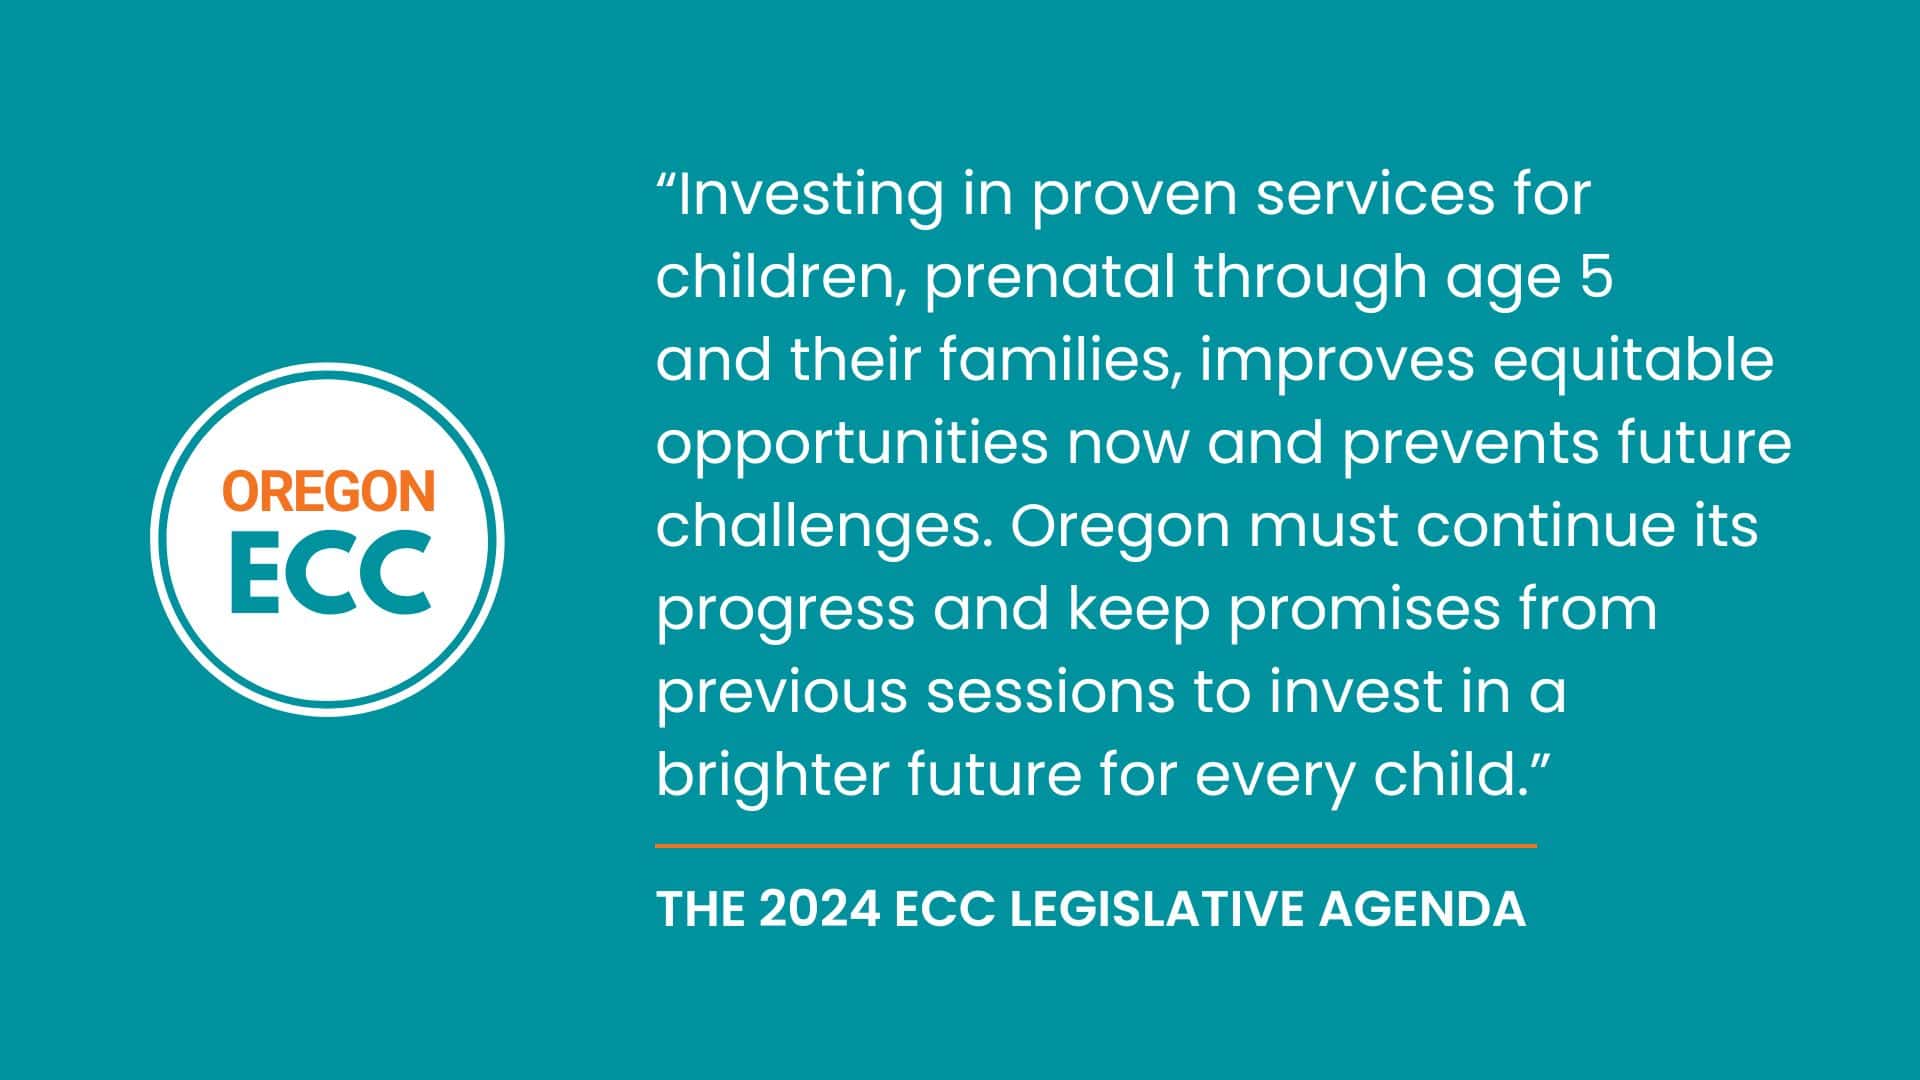 This is a turquoise graphic with white text that shares a quote from the ECC Legislative Agenda: "“Investing in proven services for children, prenatal through age 5<br />
and their families, improves equitable opportunities now and prevents future challenges. Oregon must continue its progress and keep promises from previous sessions to invest in a brighter future for every child.” 